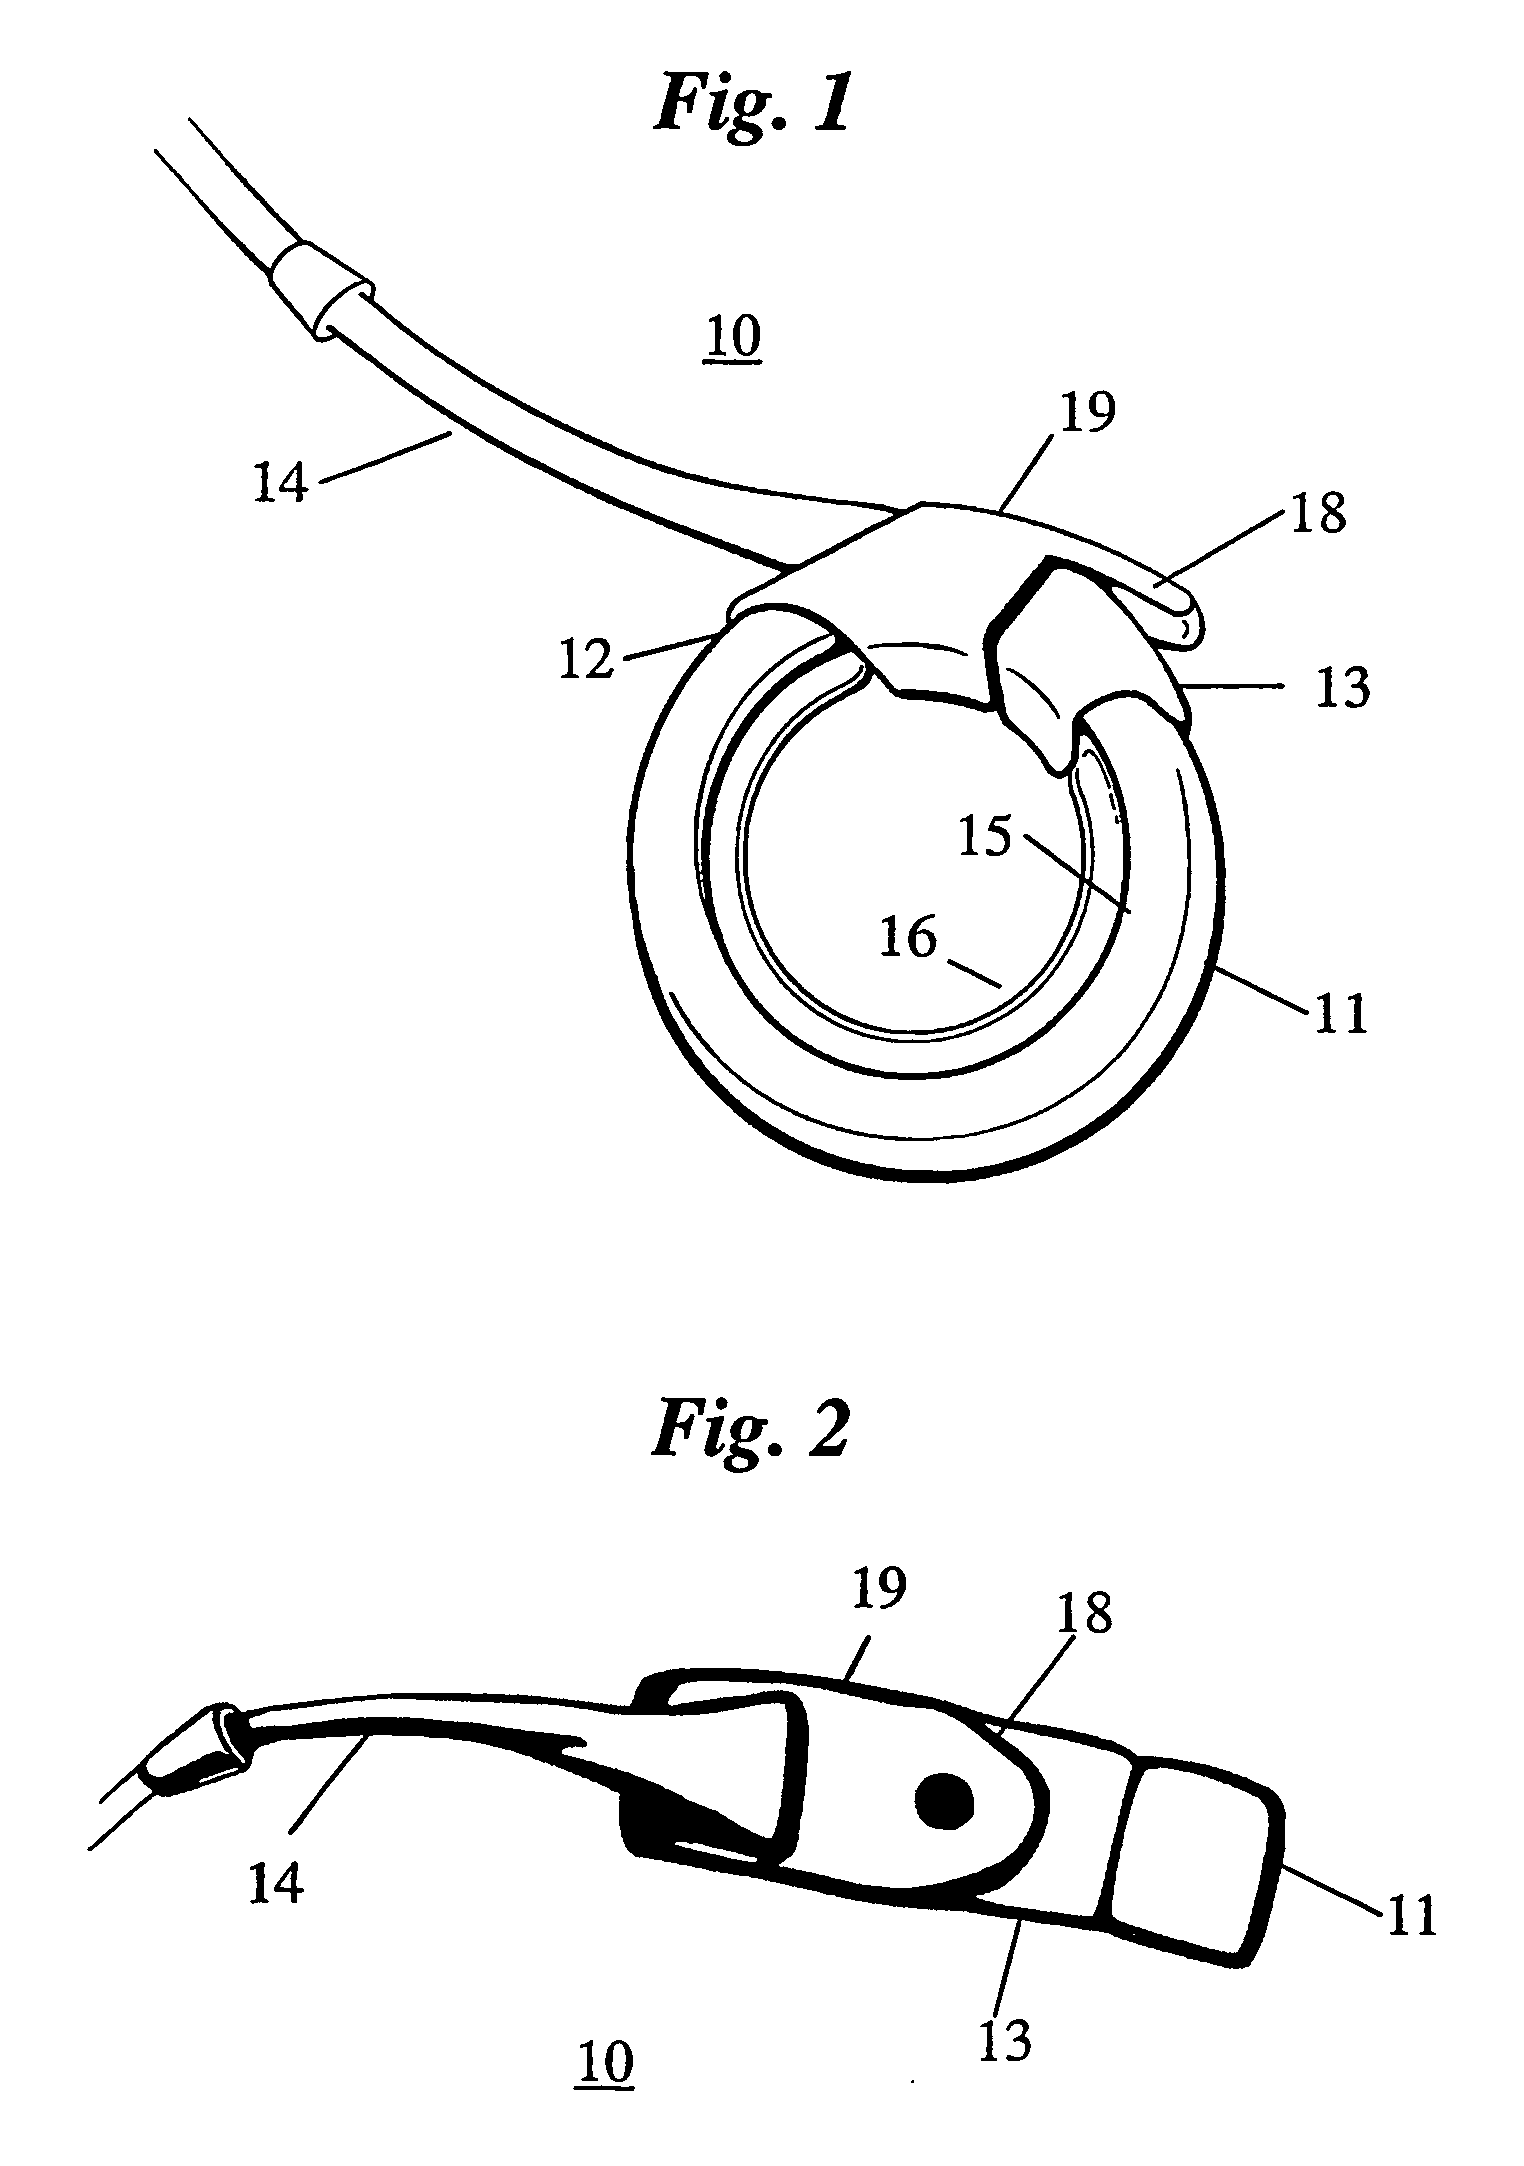 Remotely adjustable gastric banding device and method